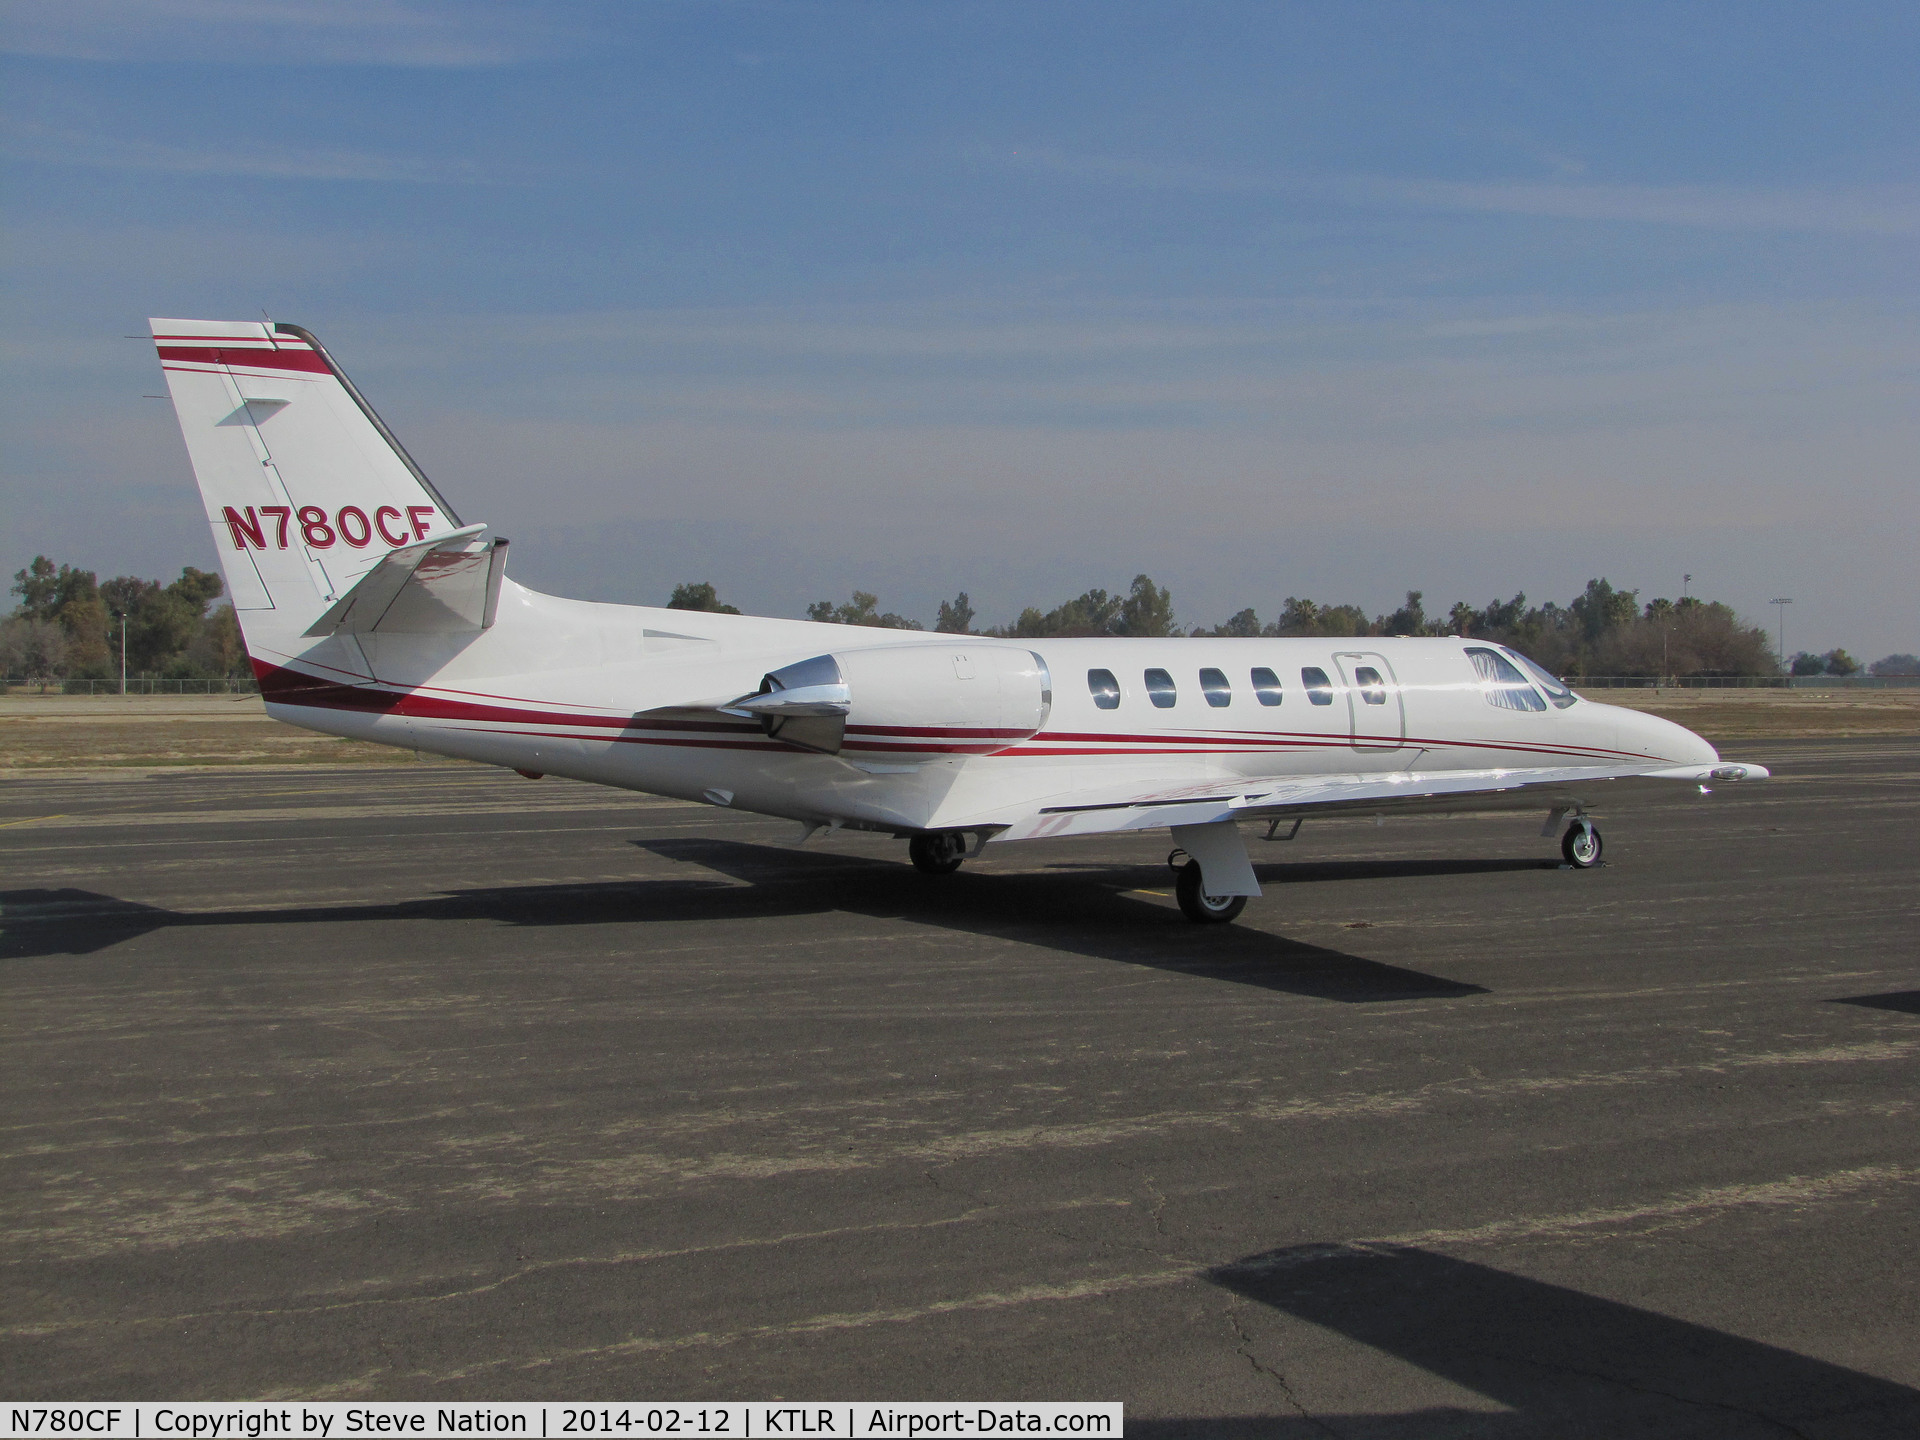 N780CF, 1978 Cessna 550 Citation II C/N 550-0014, Carfayne, Inc. (Corvallis, OR) operates one of the earliest Cessna 550s (550-0014) still on FAA register - @ Mefford Field (Tulare, CA) for 2014 International Ag Expo